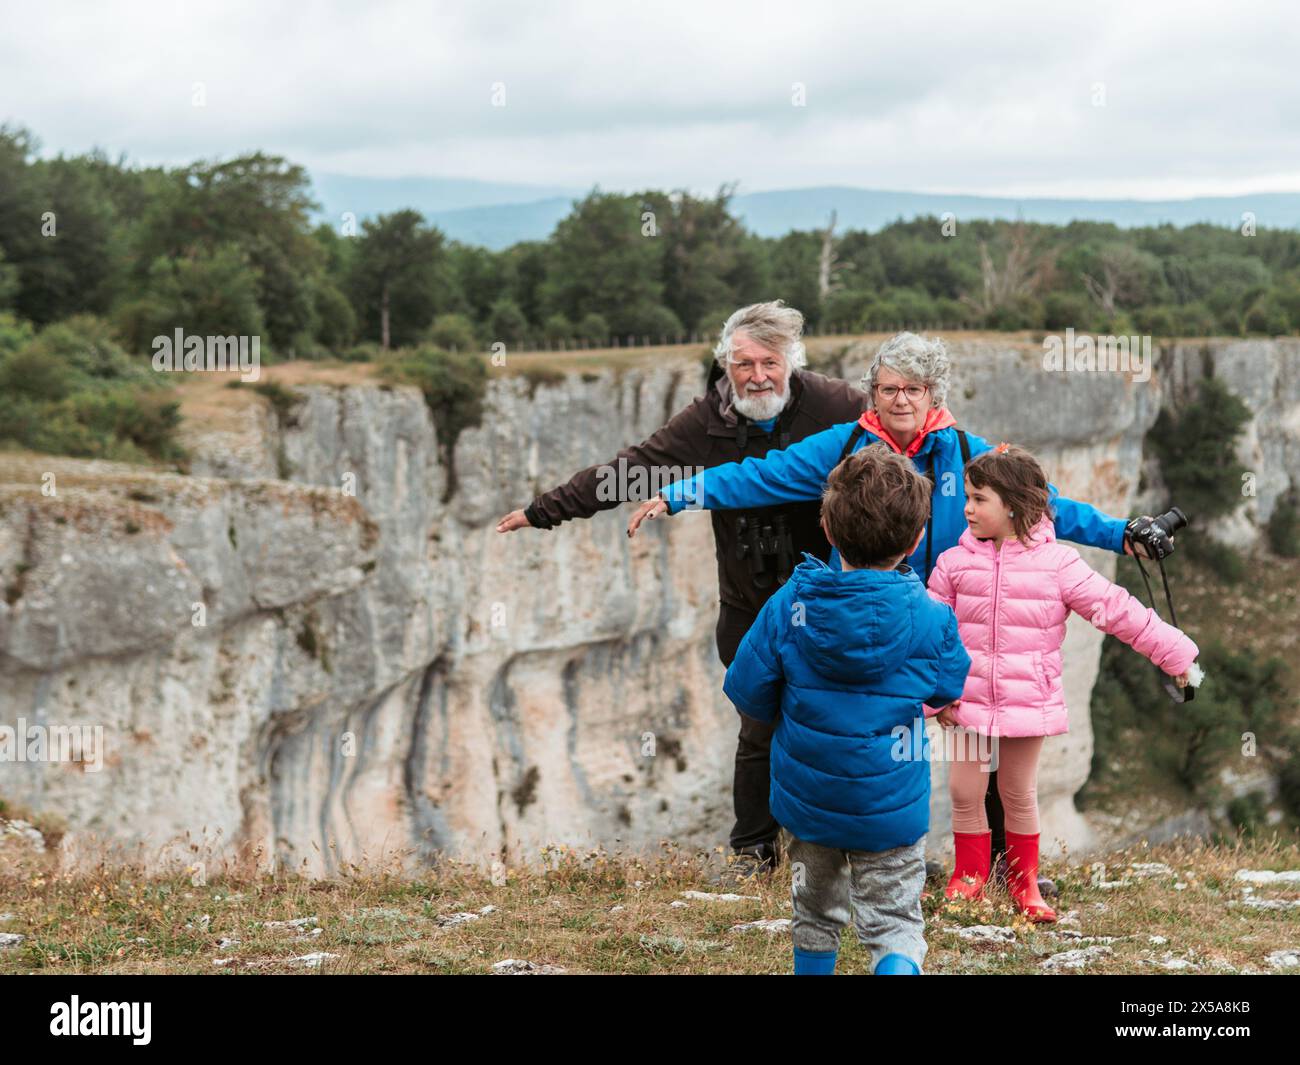 A heartwarming family scene with grandparents and their grandchildren, a boy and a girl, spending quality time together in a natural landscape. Stock Photo